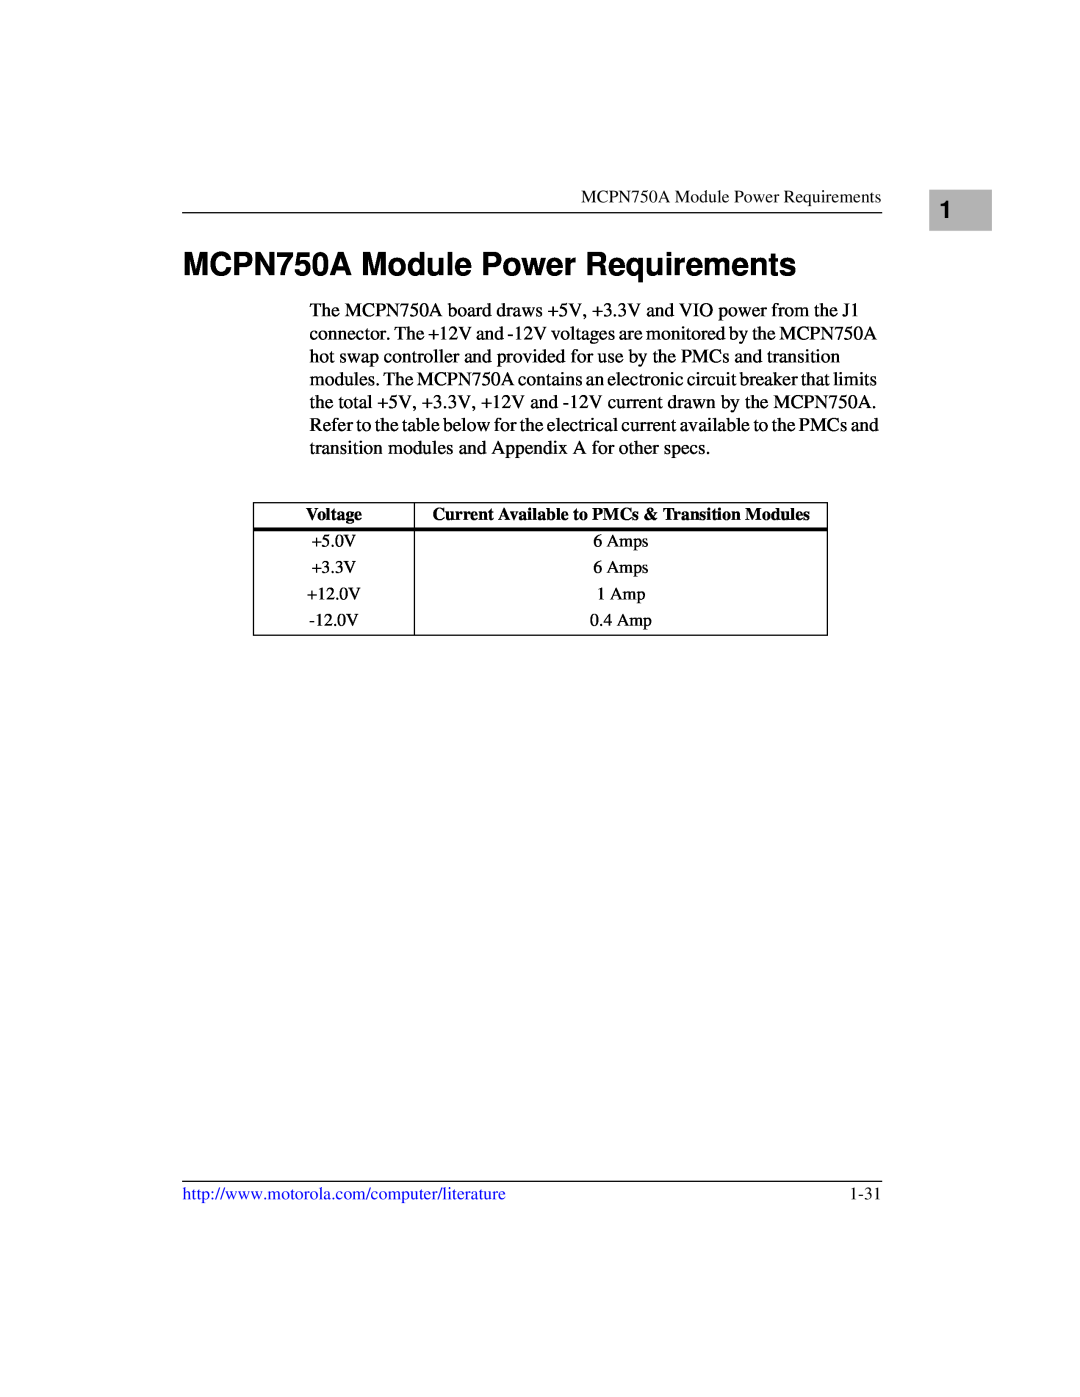 Motorola IH5 manual MCPN750A Module Power Requirements, Voltage, Current Available to PMCs & Transition Modules 